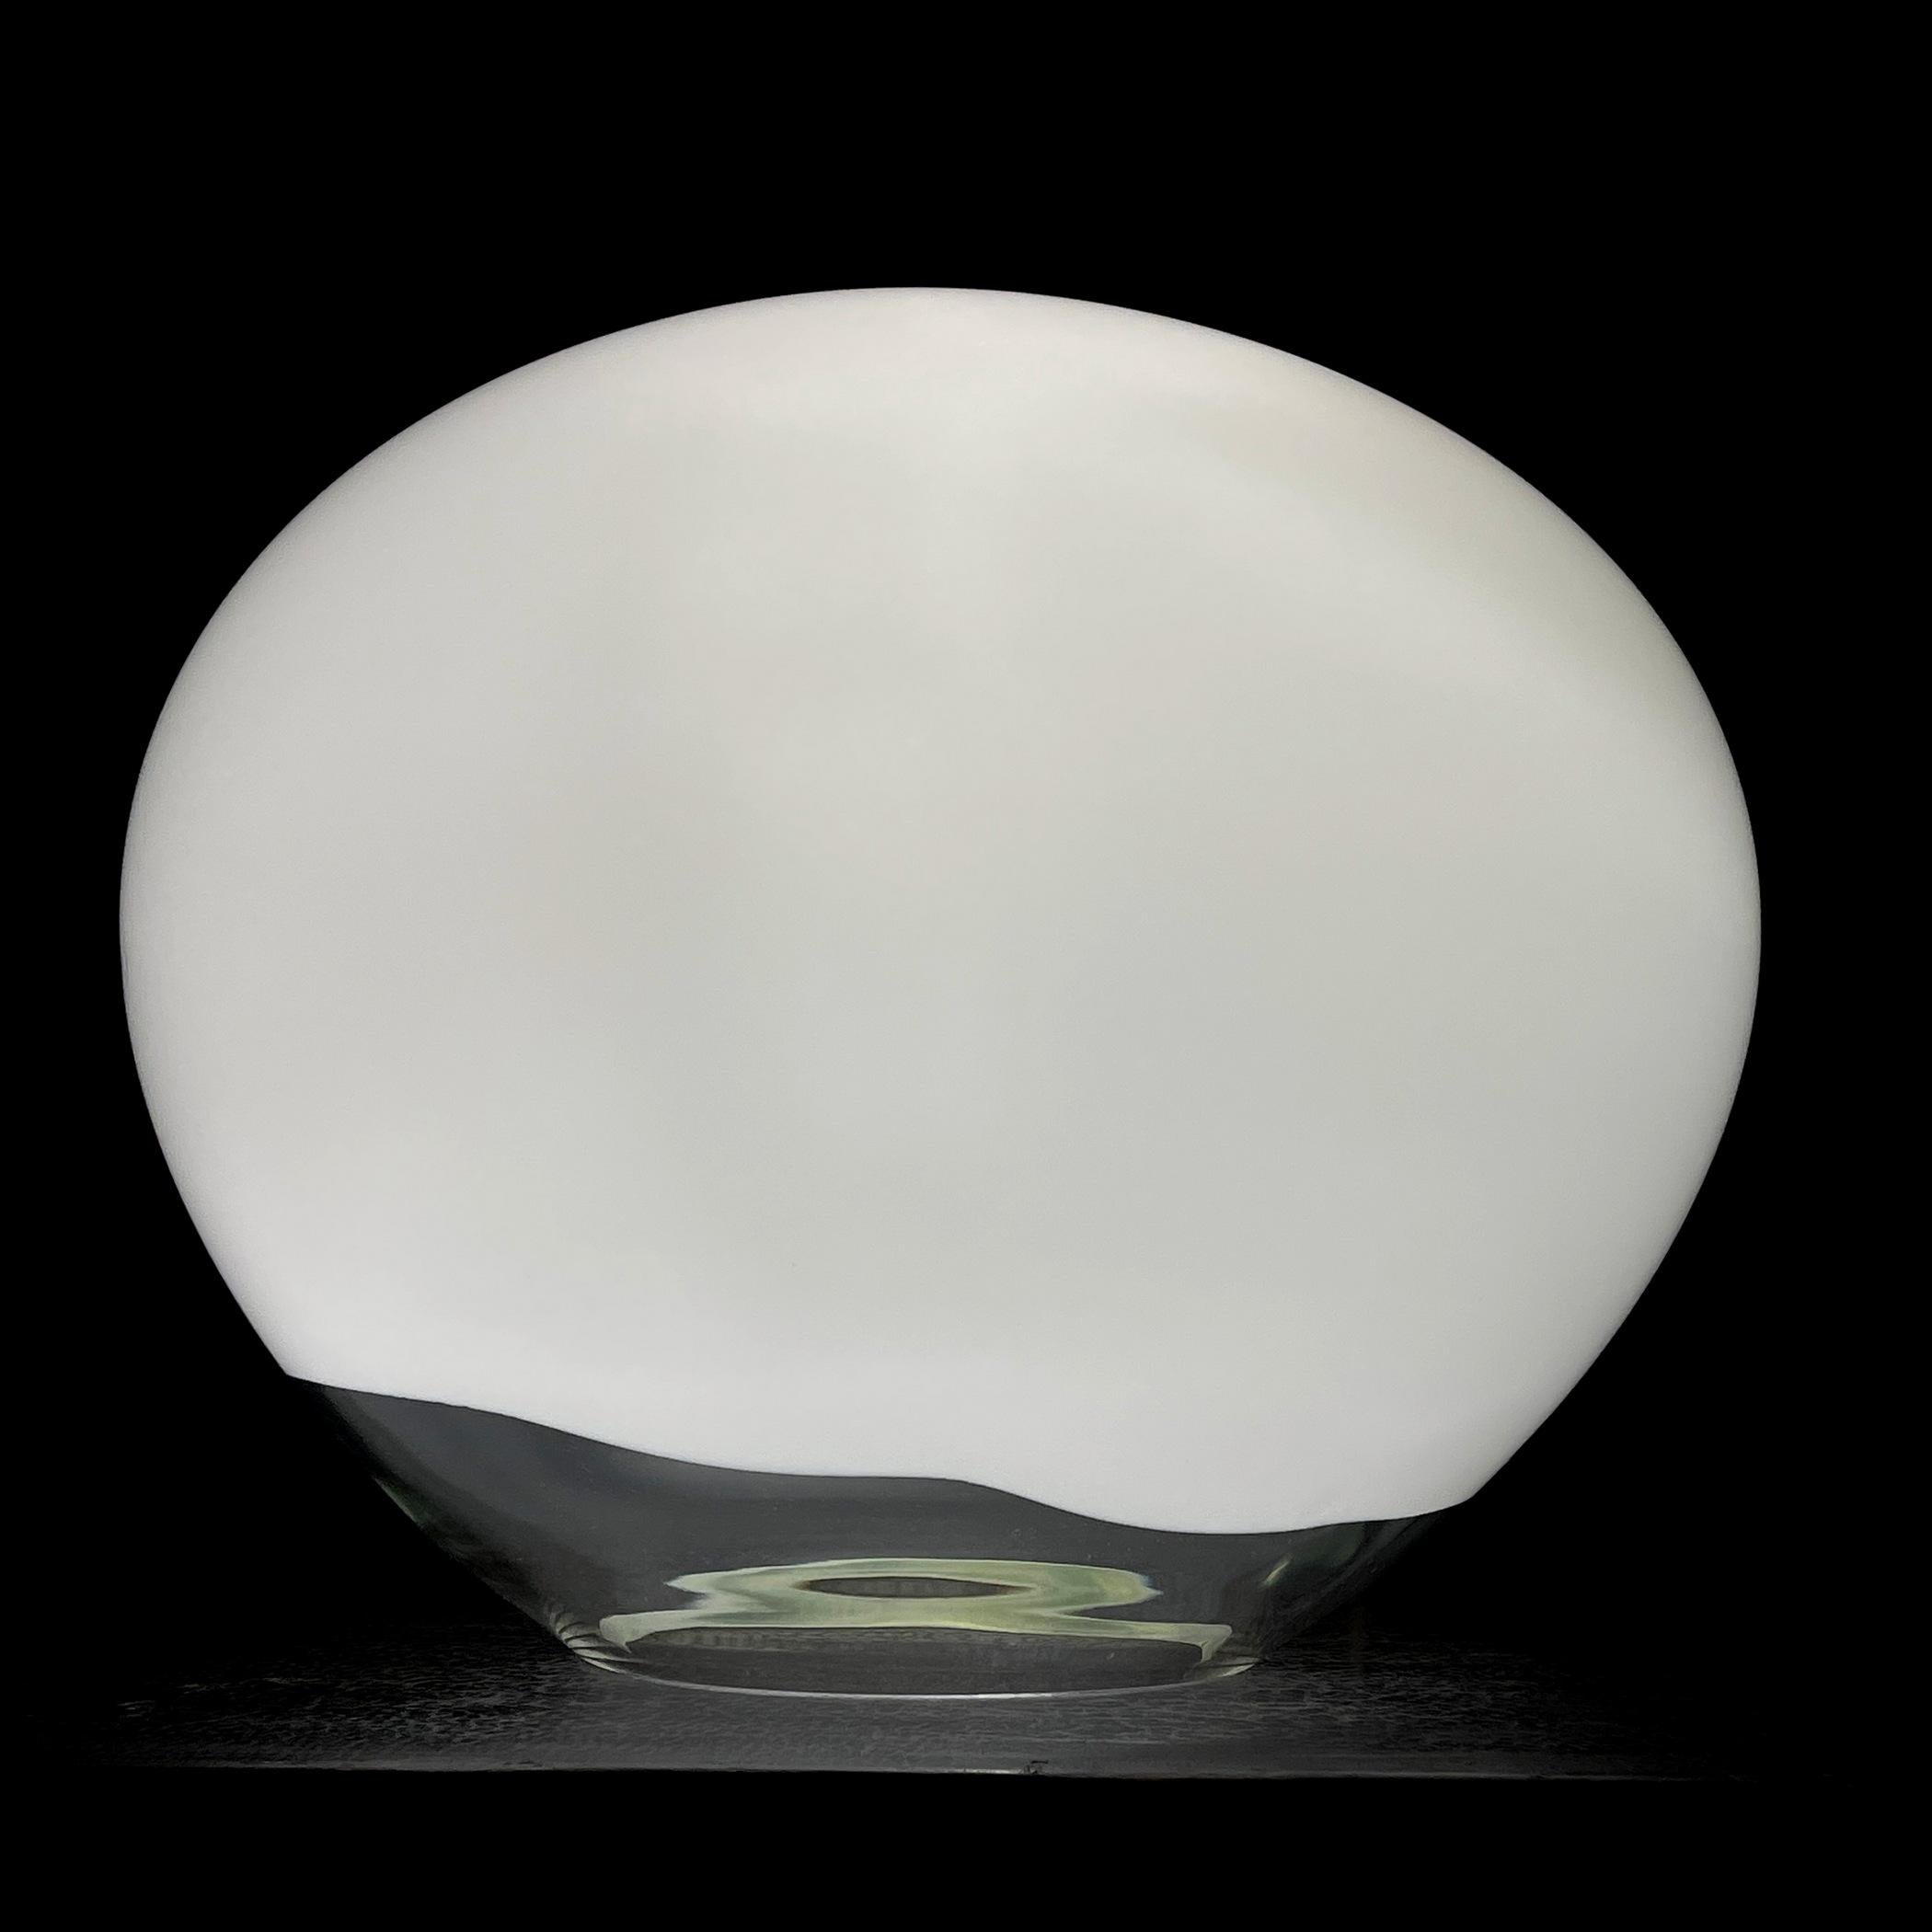 Discover the unique design of the Nessa table lamp, which captivates with its exquisite beauty and unconventional style. Handcrafted from various shades of Murano glass, this lamp visually resembles an elongated circle. The distinctive flattened